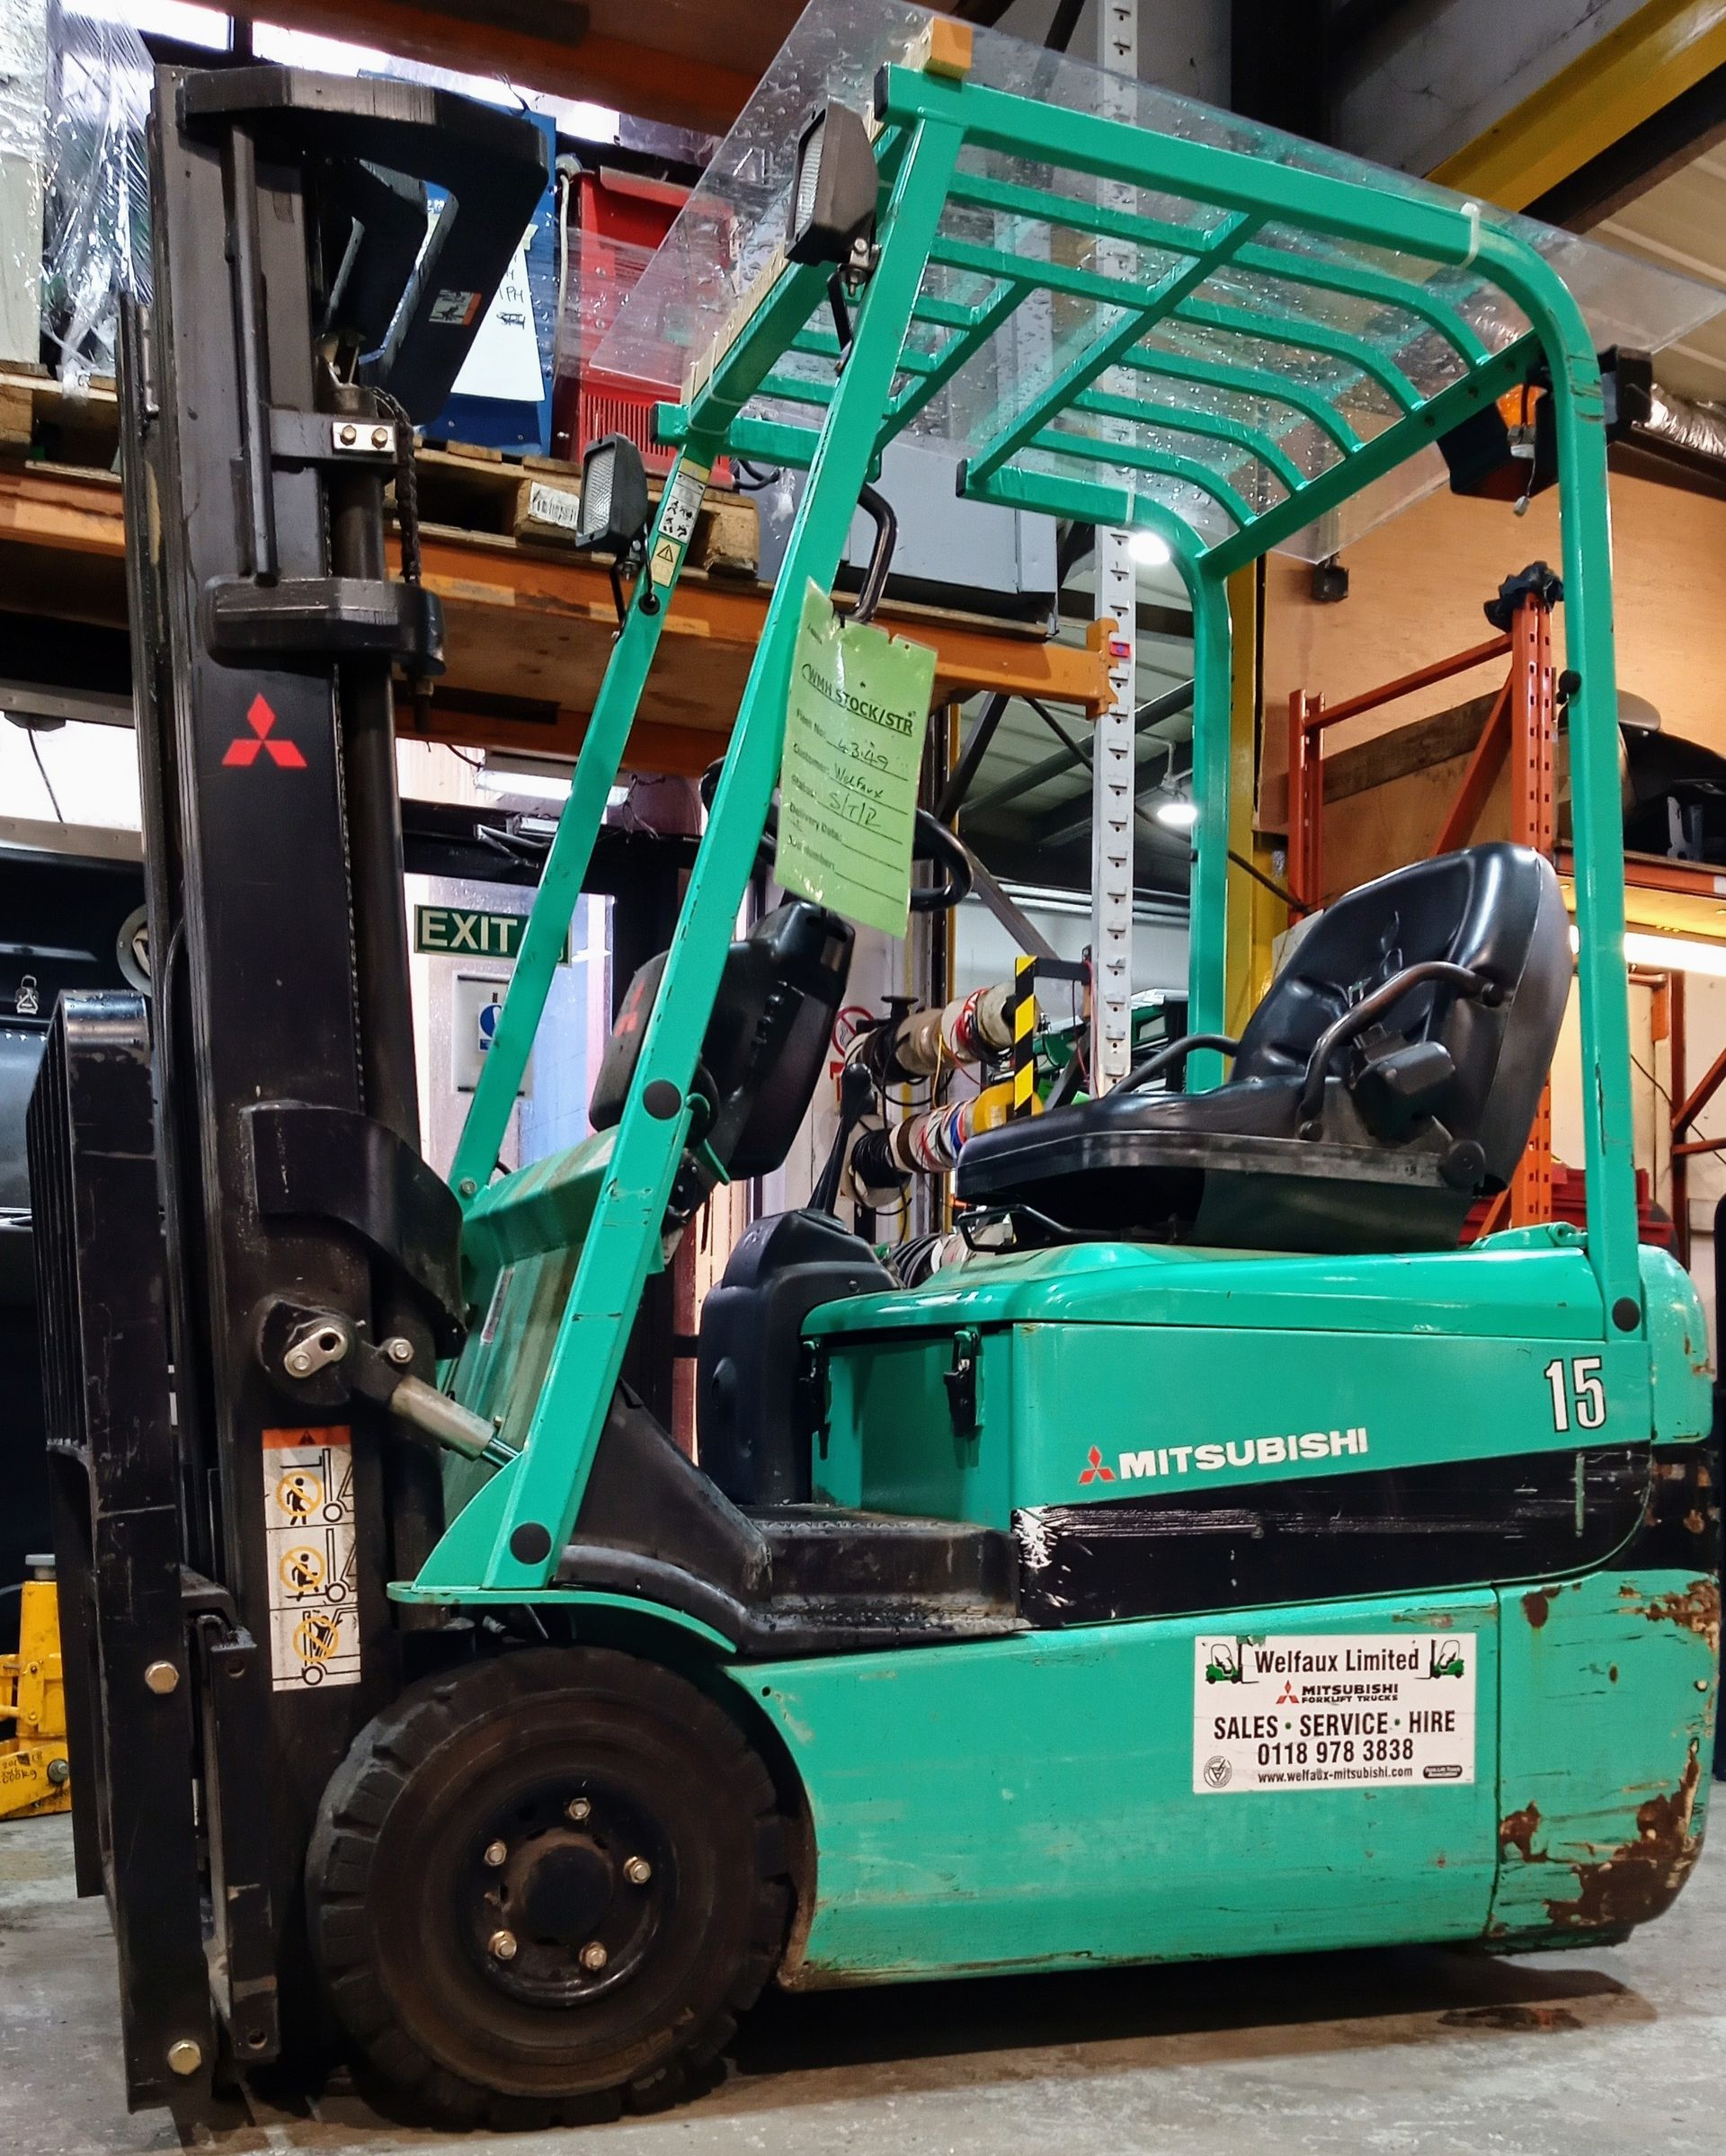 A green and black forklift is parked in a warehouse